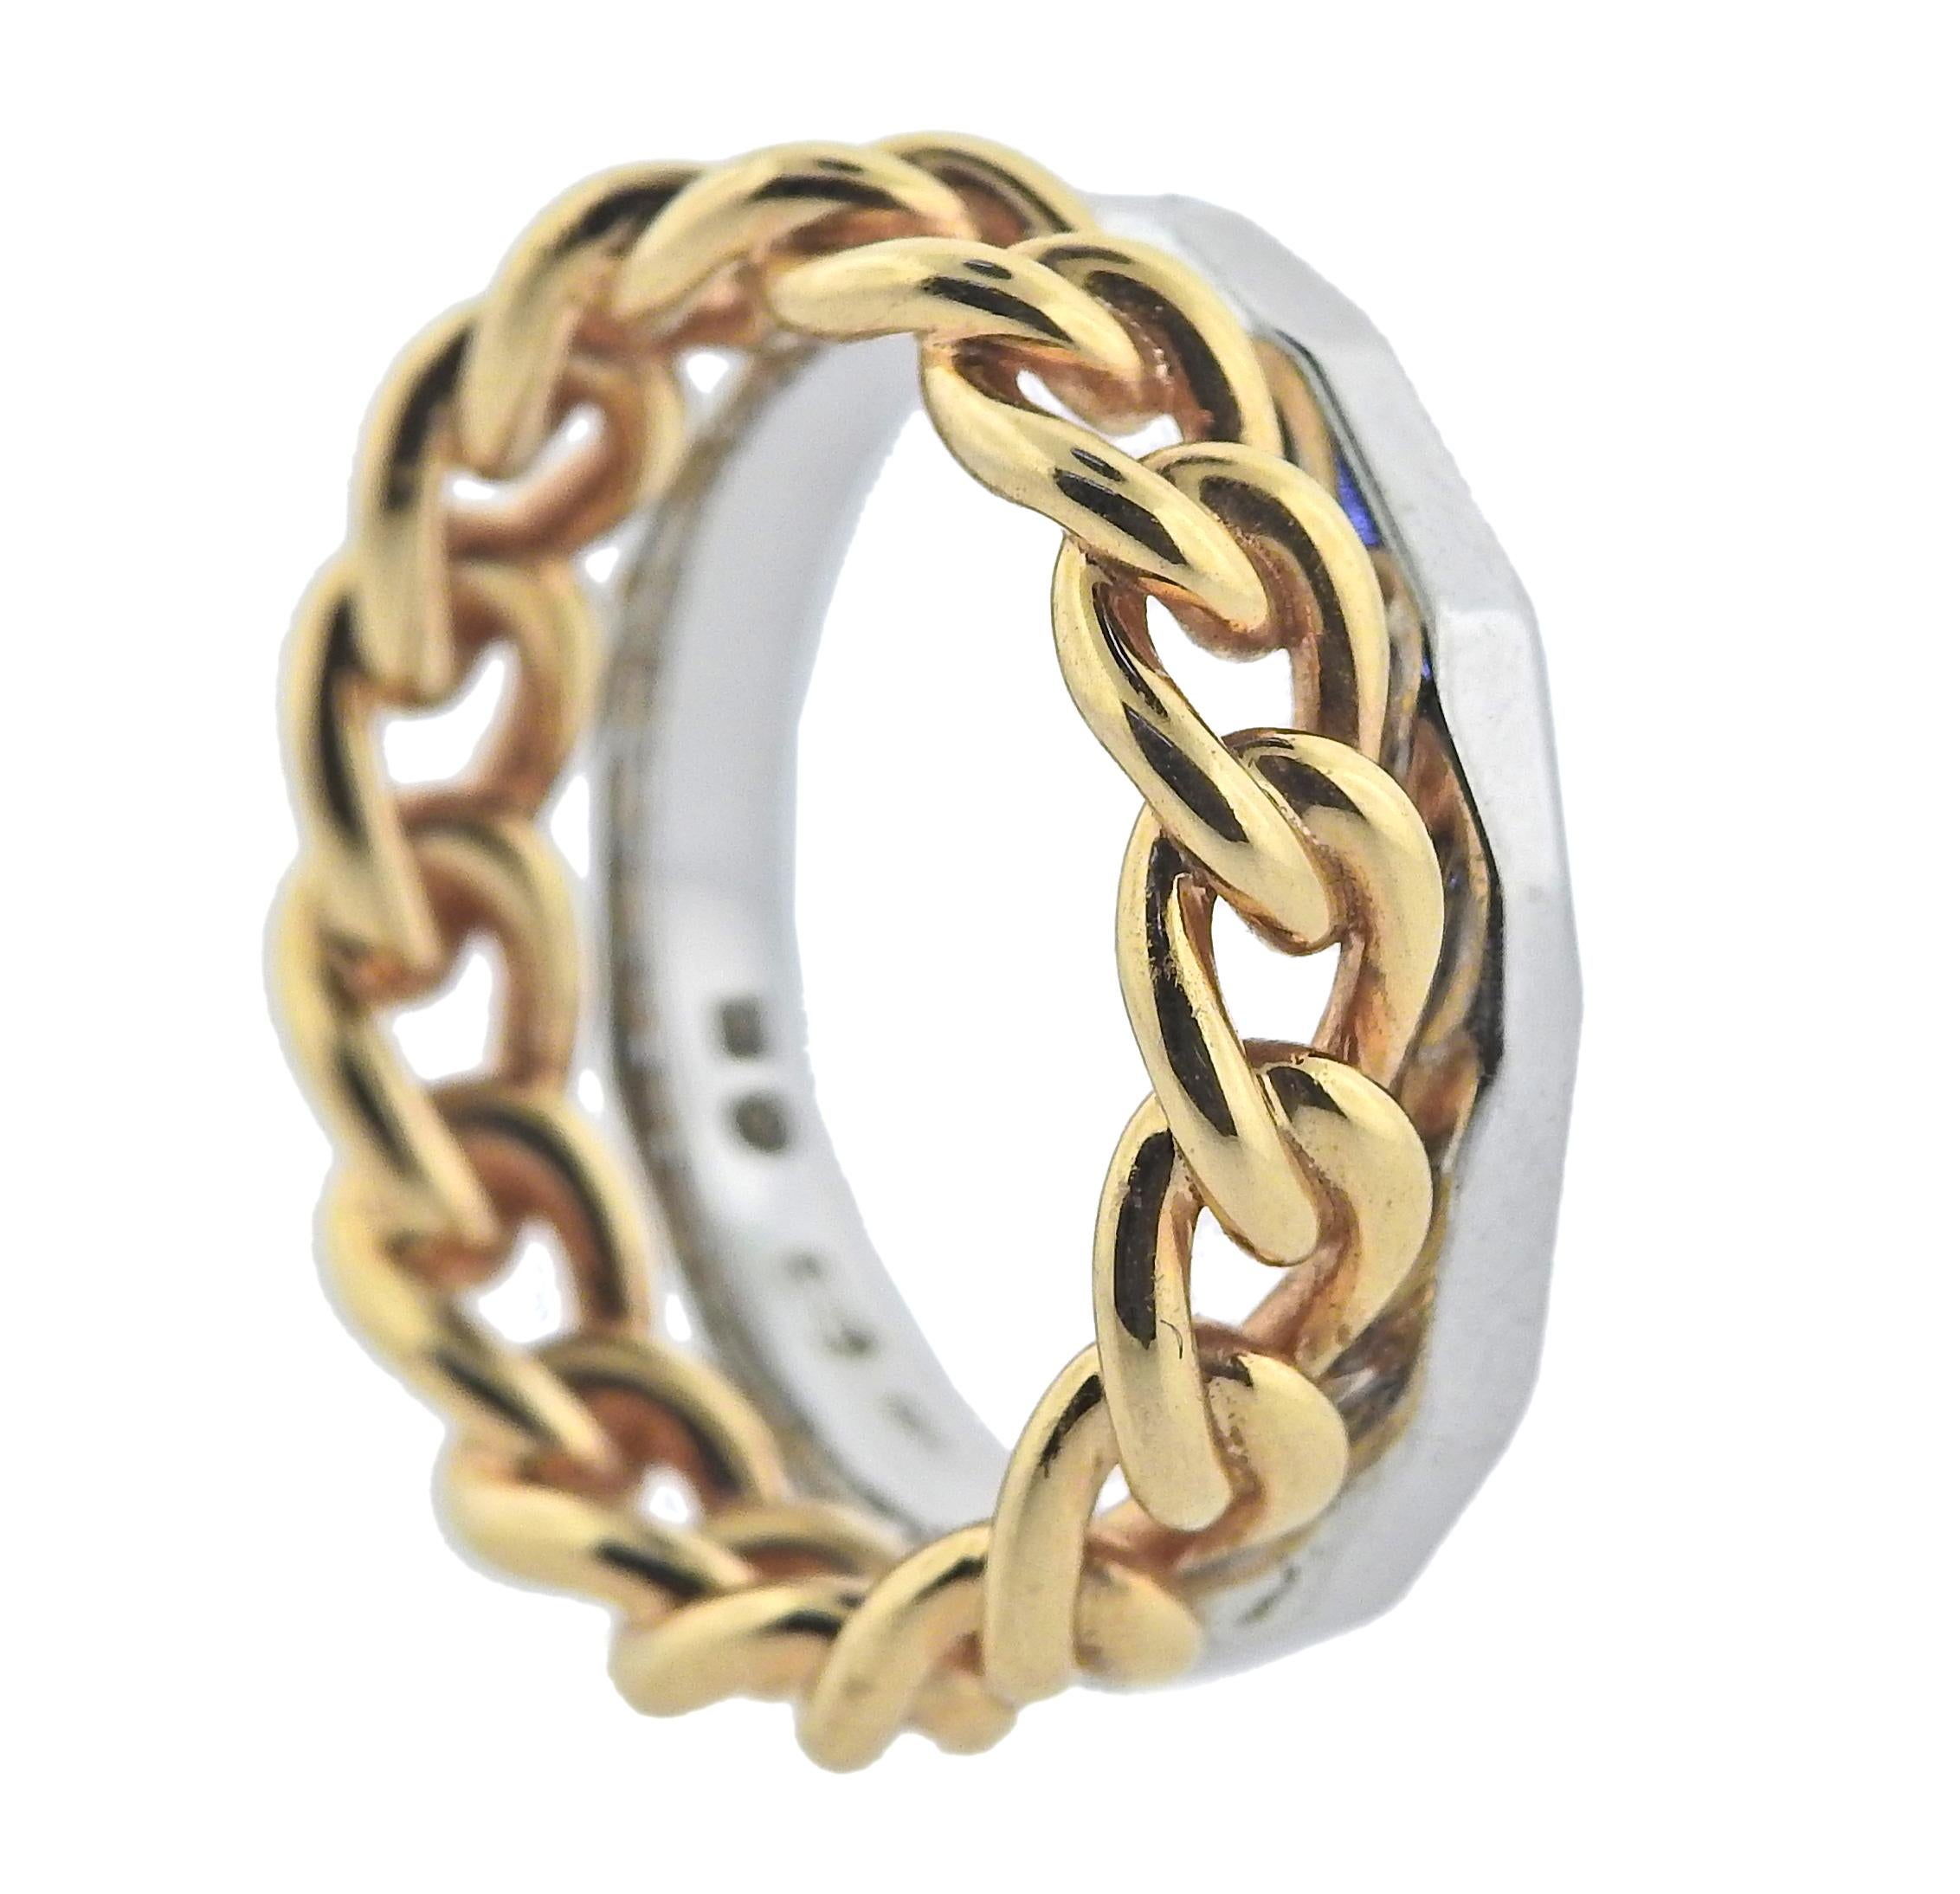 Pomellato 18k rose and white gold cuban link band ring made for Milano collection. Ring size 6 3/4 and it is 8.2mm wide. Marked: 750, Italian gold marks, Pomellato, Milano. Weight is 9.98 grams. 